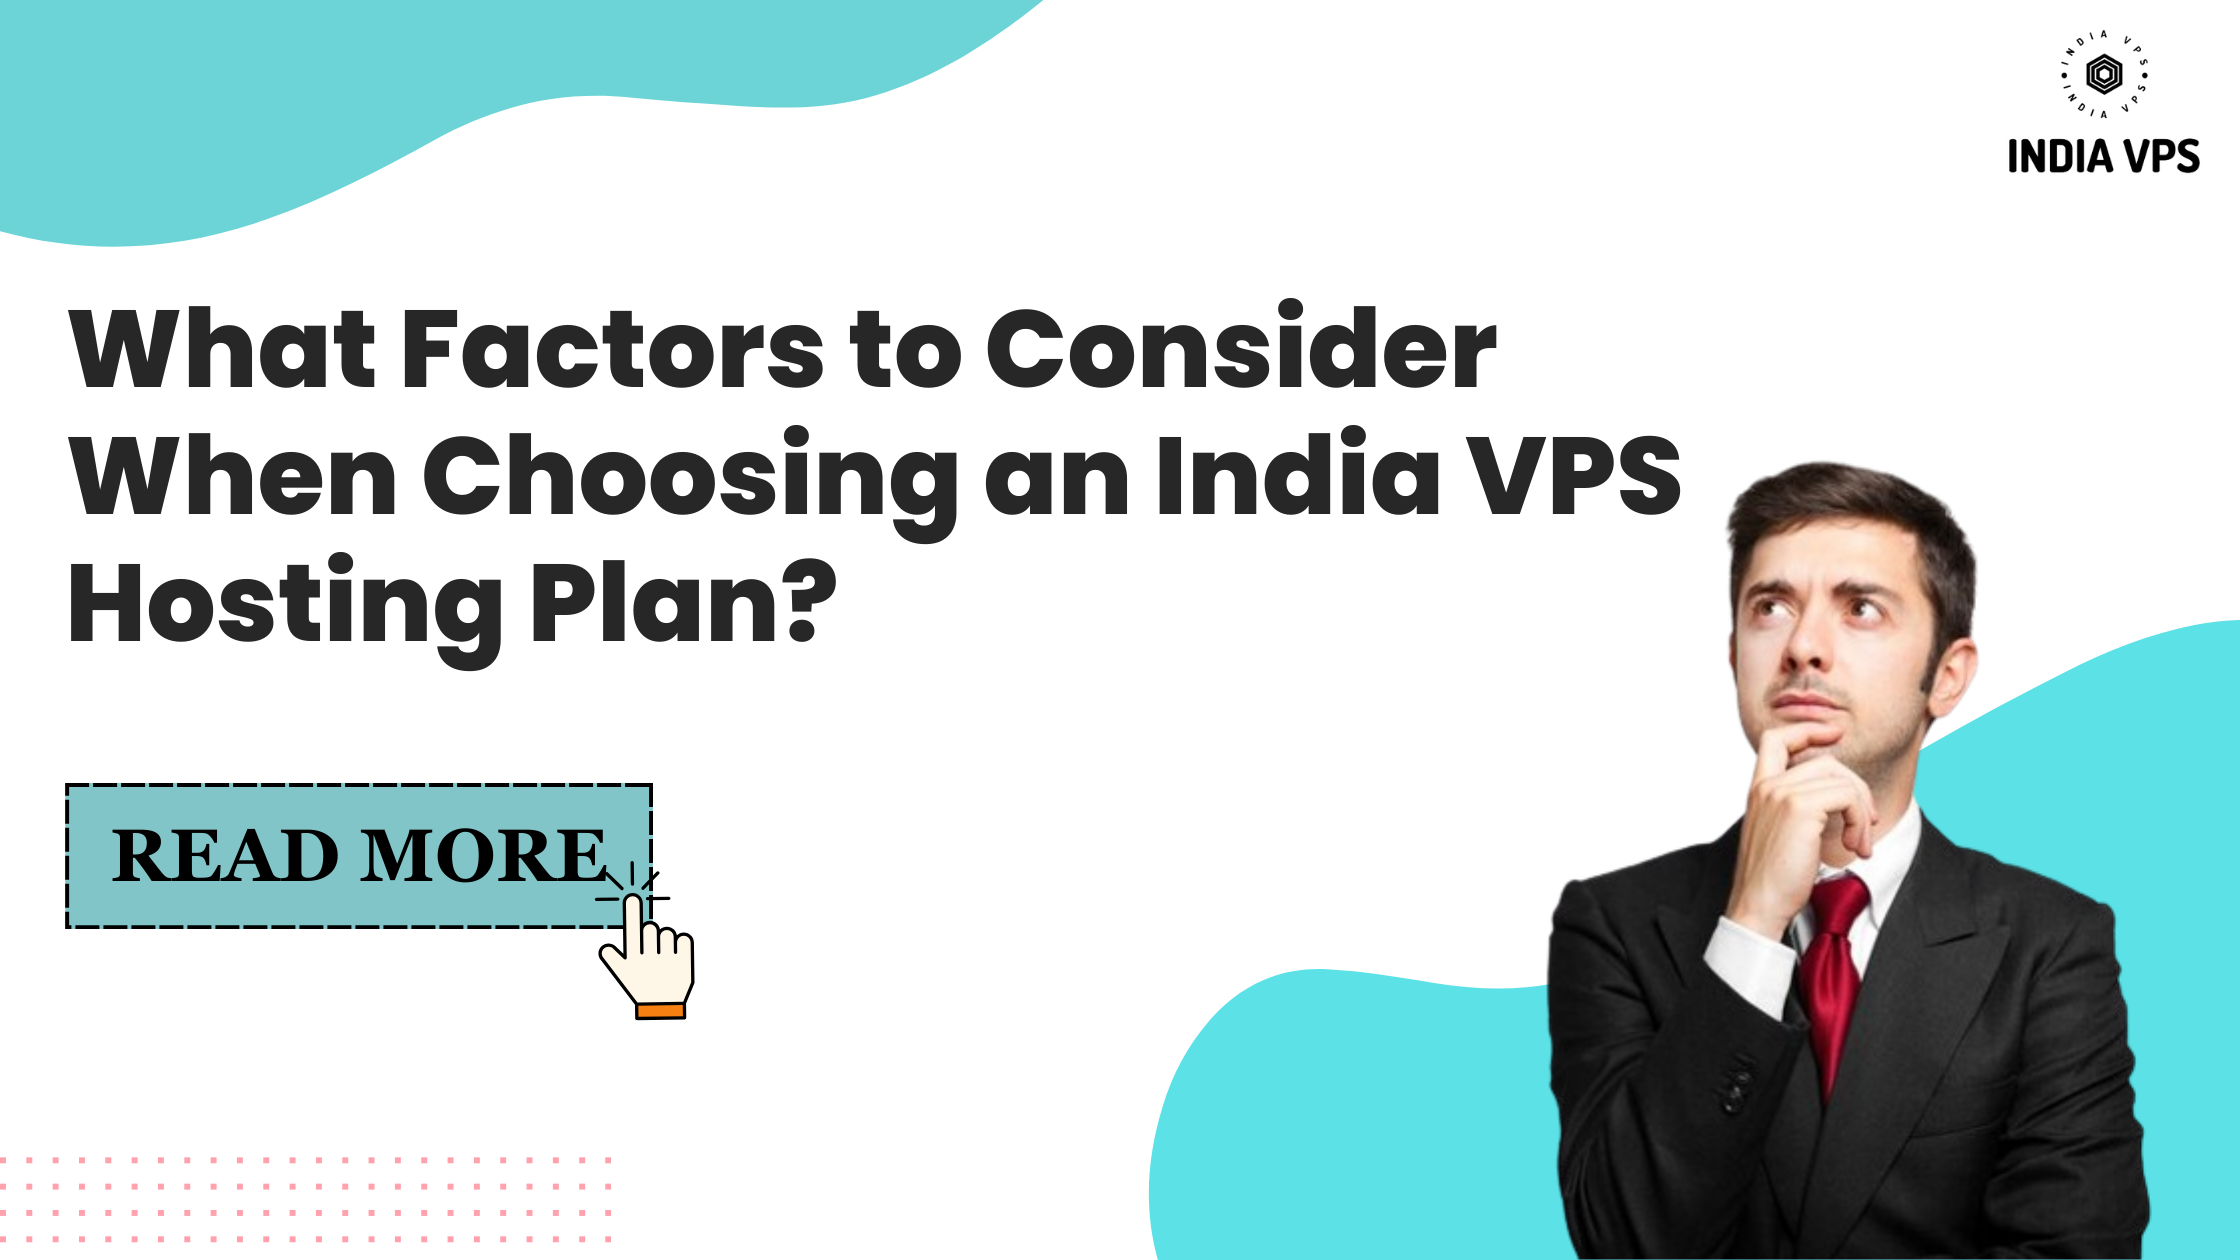 What Factors to Consider When Choosing an India VPS Hosting Plan?